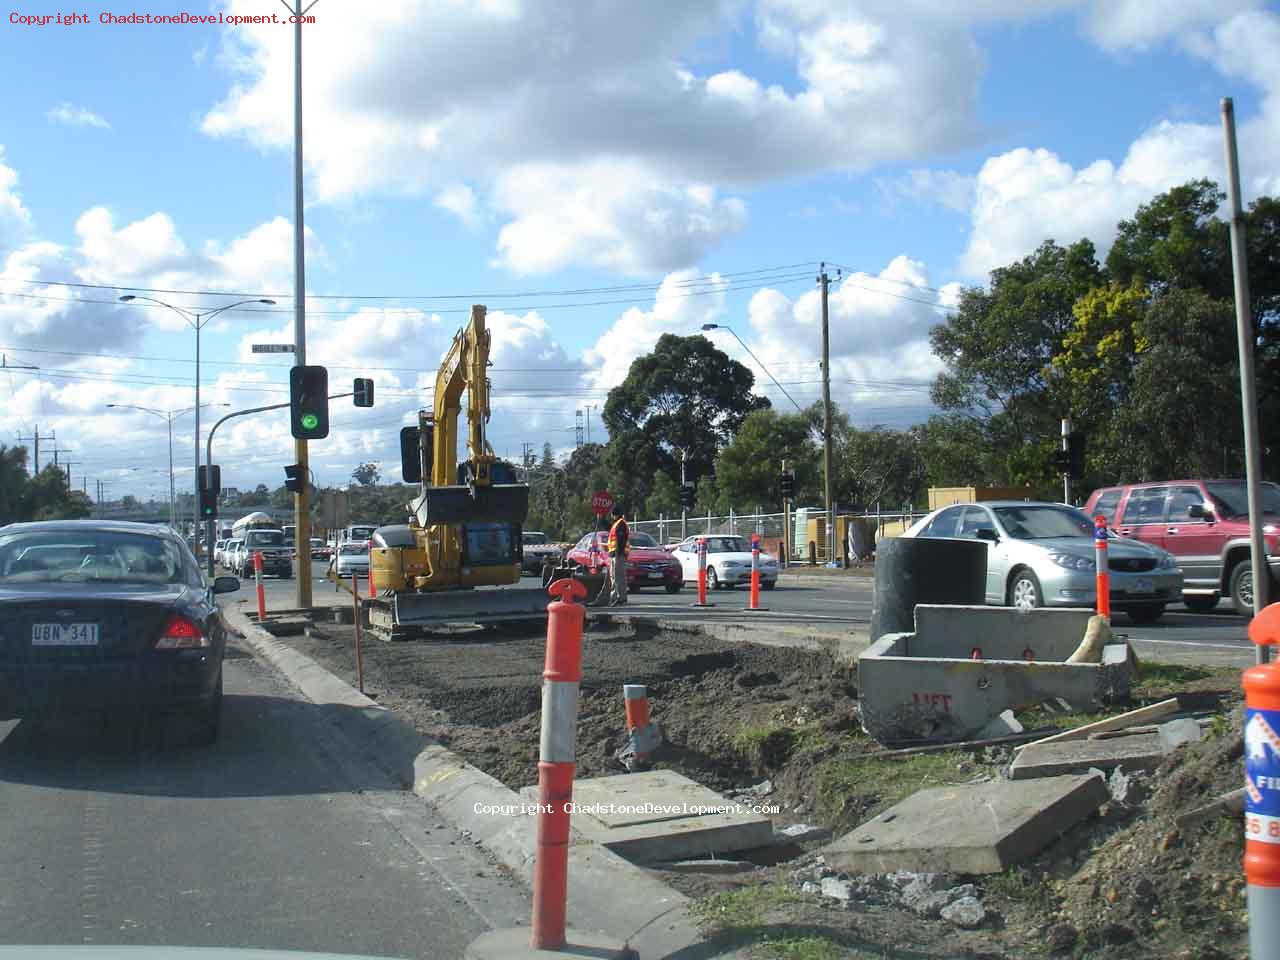 Closeup of median strip, right lane - Chadstone Development Discussions